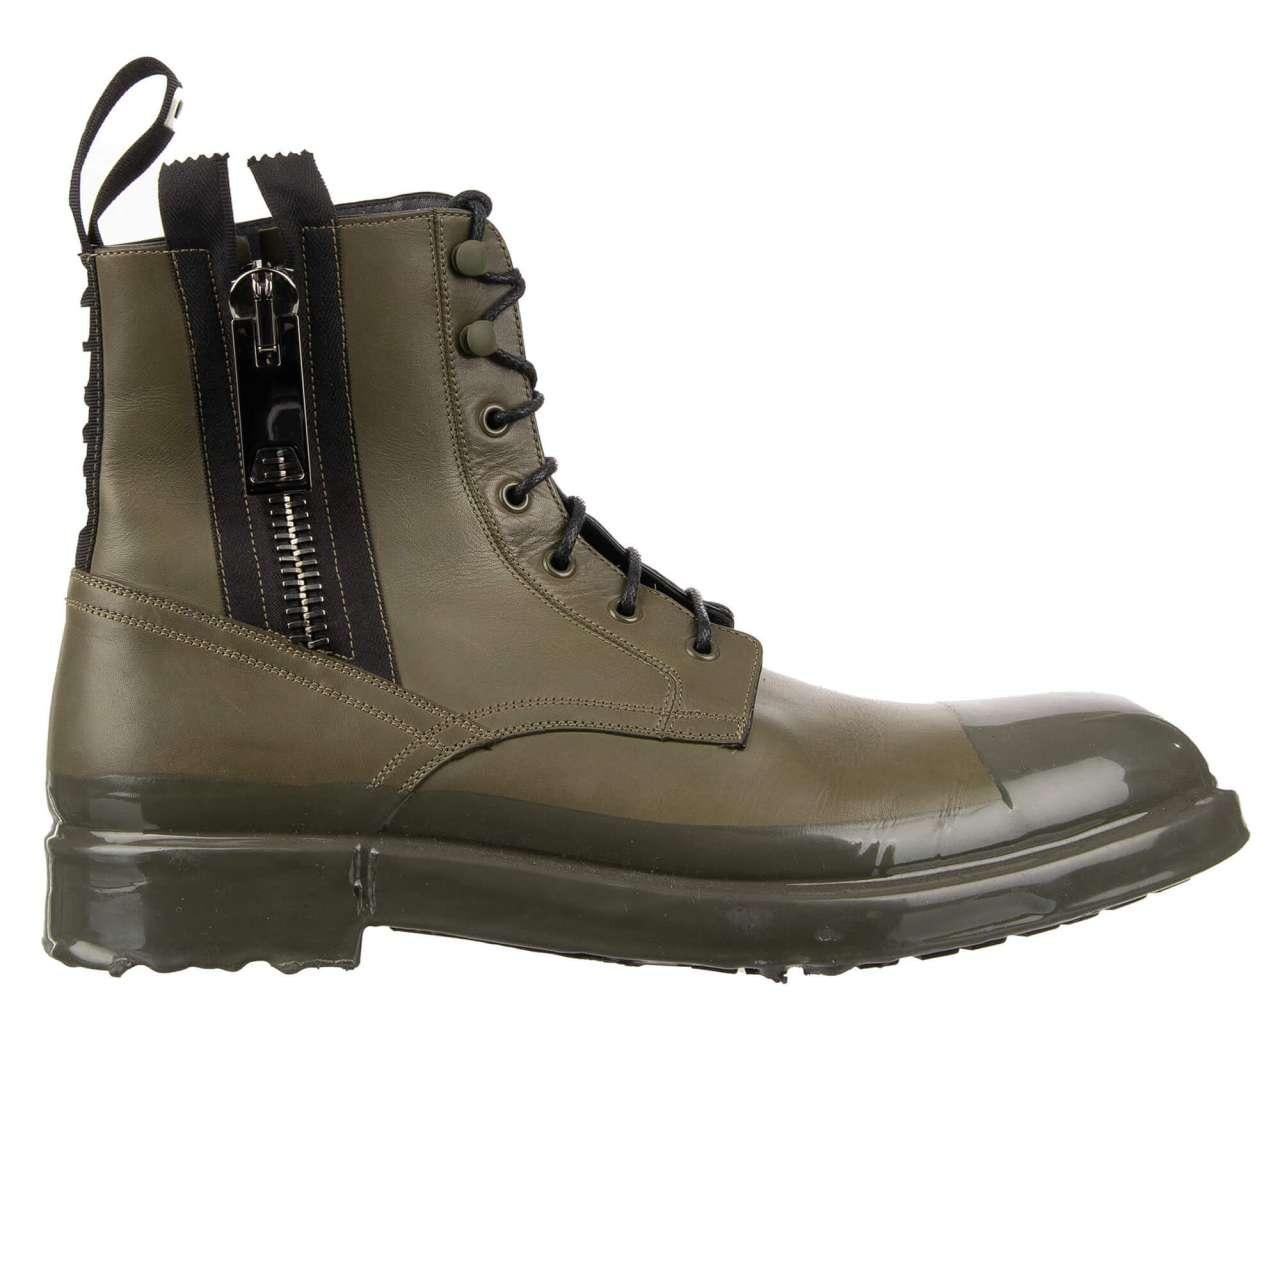 - DG Logo Ankle Boots FIRENZE made of leather with liquid rubber covered sole in military green by DOLCE & GABBANA - MADE IN ITALY - Former RRP: EUR 1,400 - New with Box - Model: A60195-AK253-80506 - Material: 100% Calfskin - Sole: Rubber - Color: